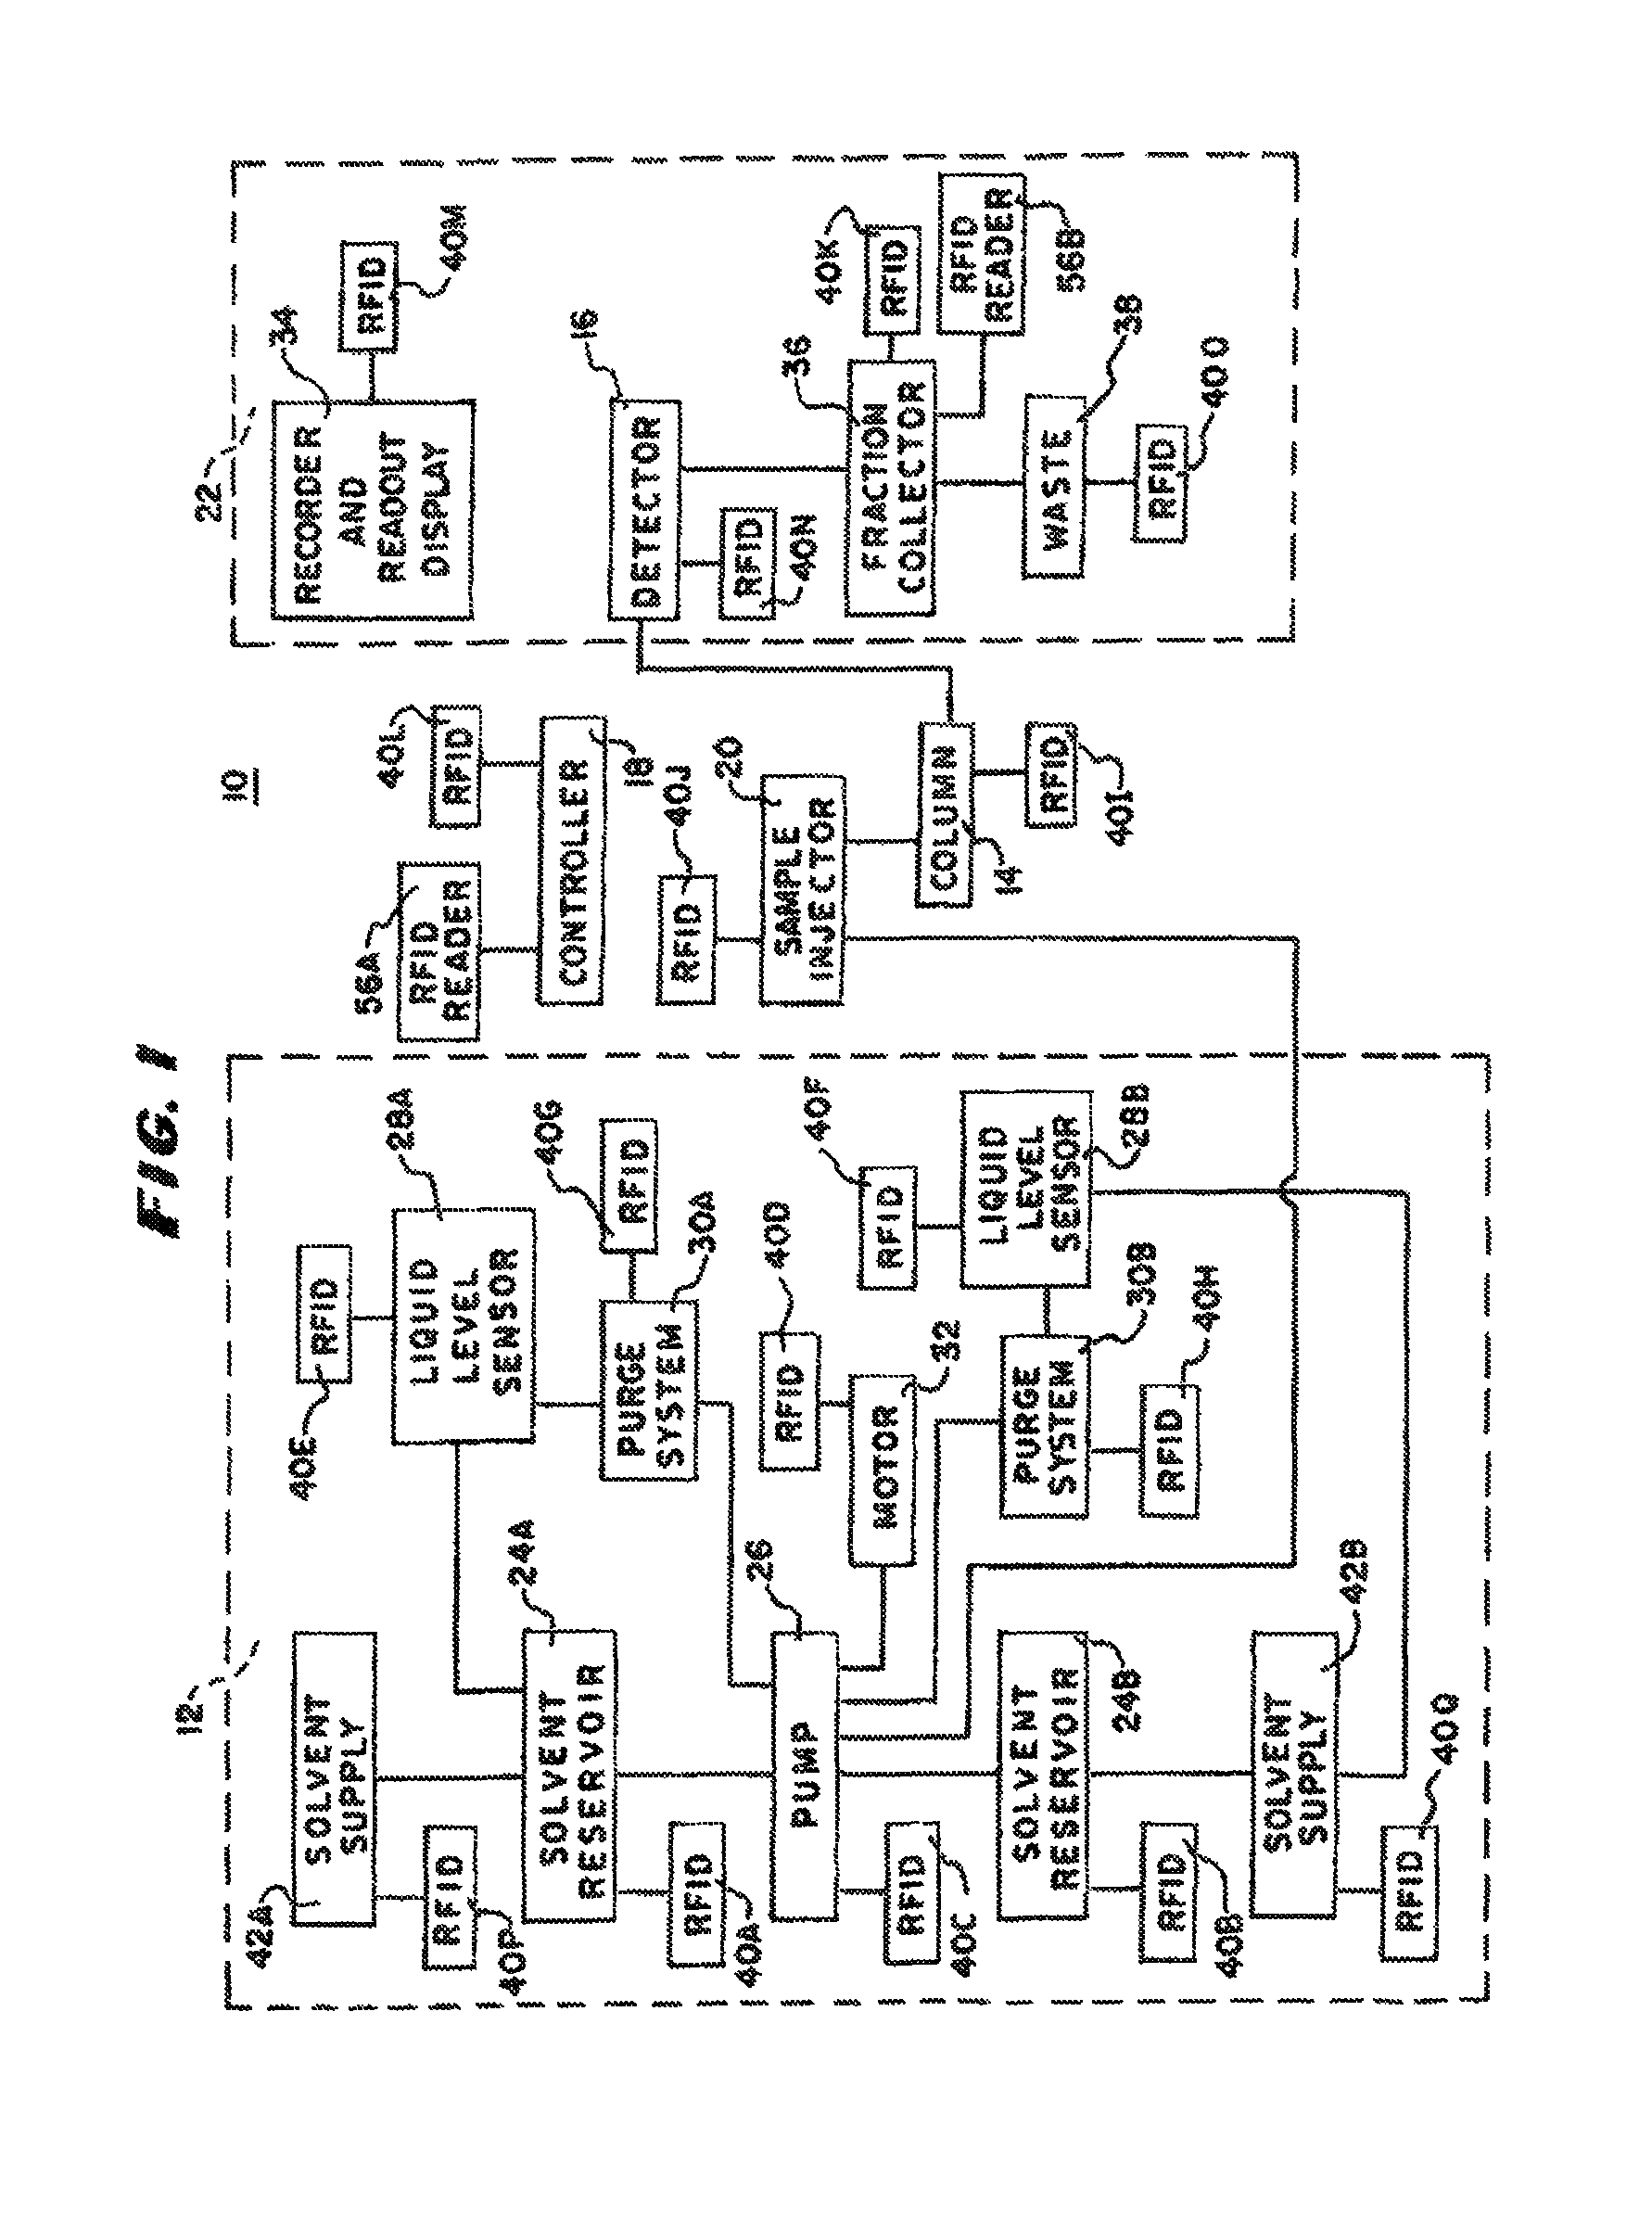 Apparatuses and methods for wireless monitoring and control of supplies for environmental sampling and chromatographic apparatuses